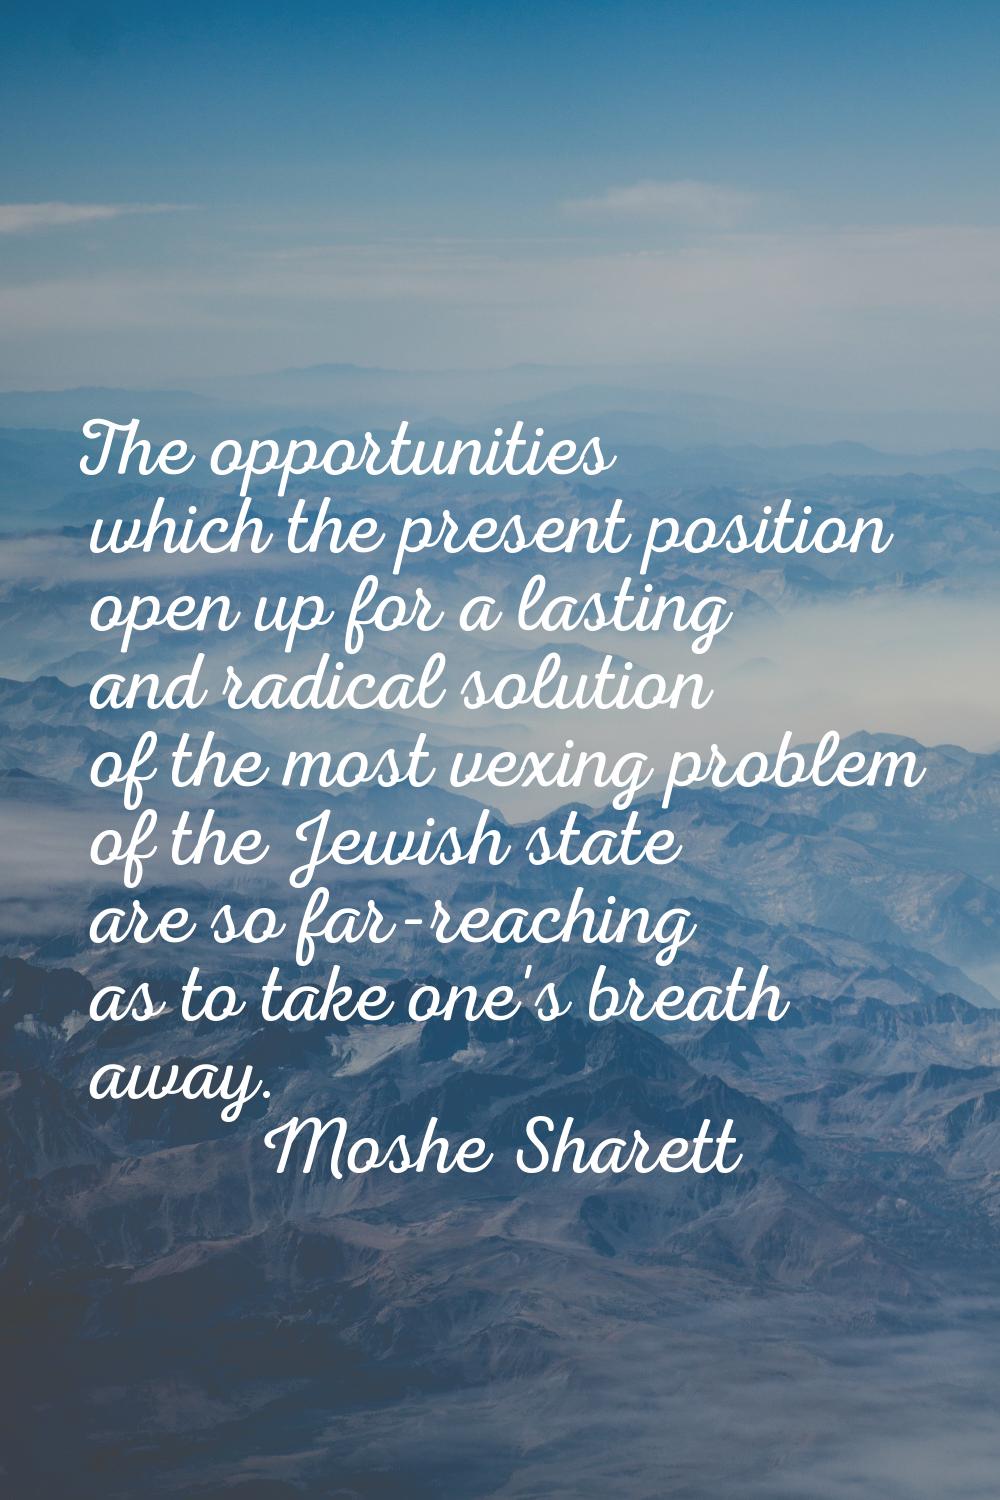 The opportunities which the present position open up for a lasting and radical solution of the most